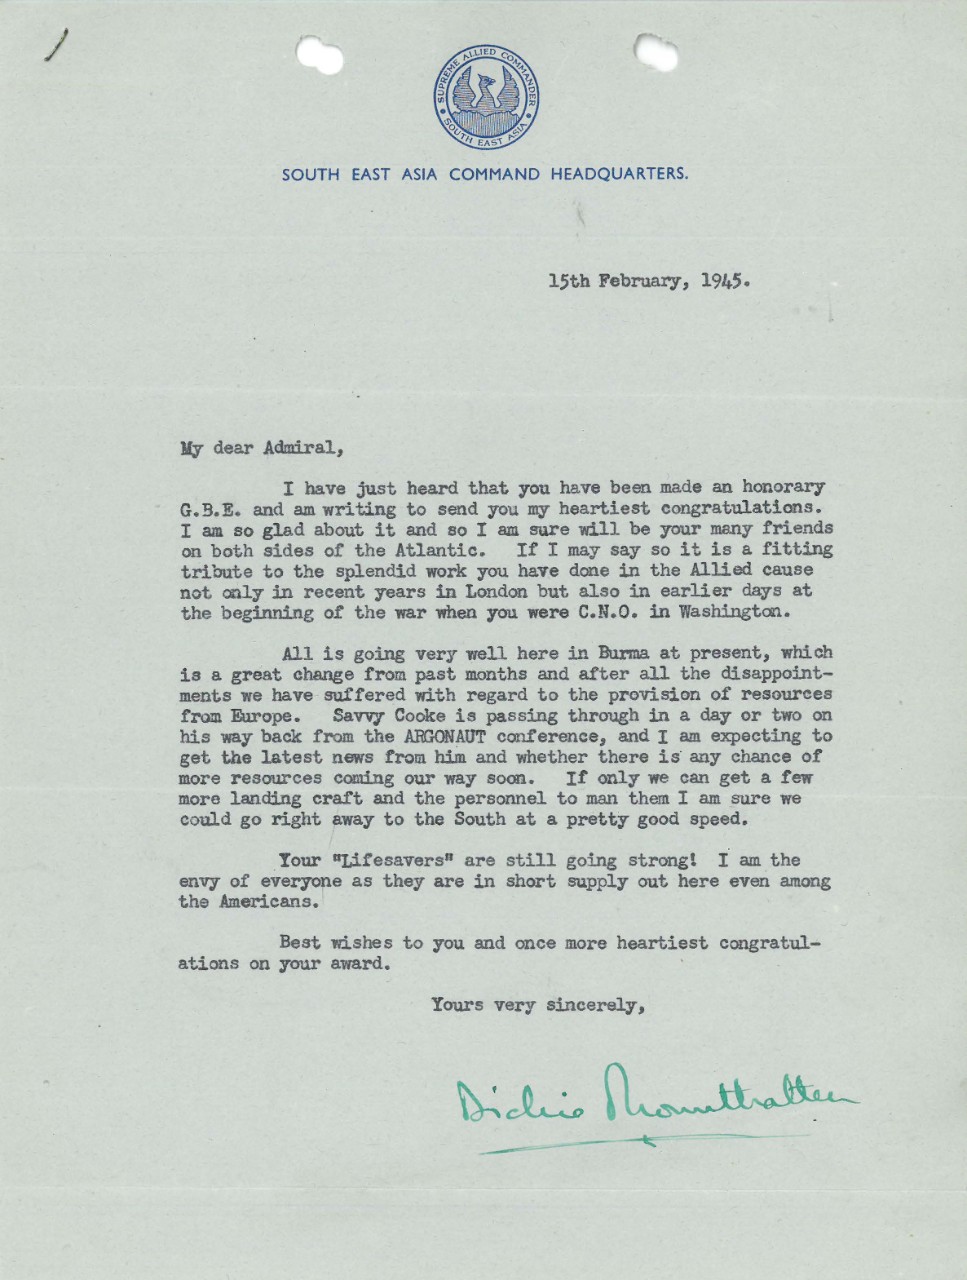 Letter from Lord Mountbatten to Admiral Stark dated Feb. 15, 1945